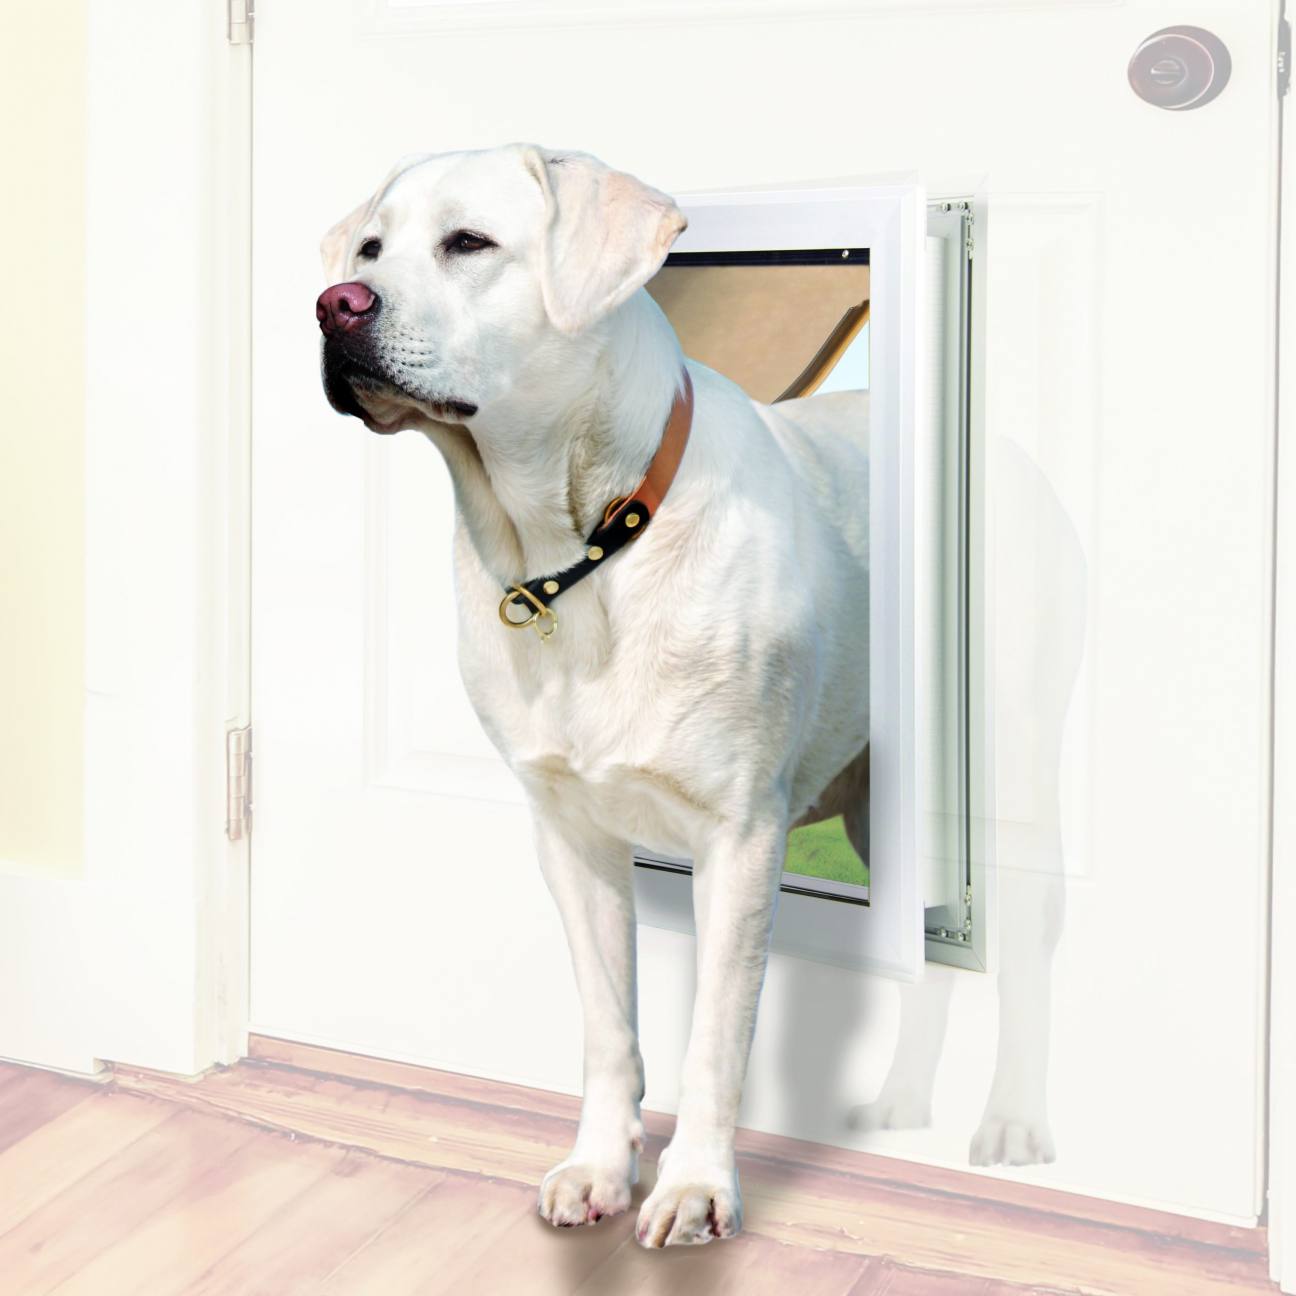 Give Your Pets Freedom with a Dog Door